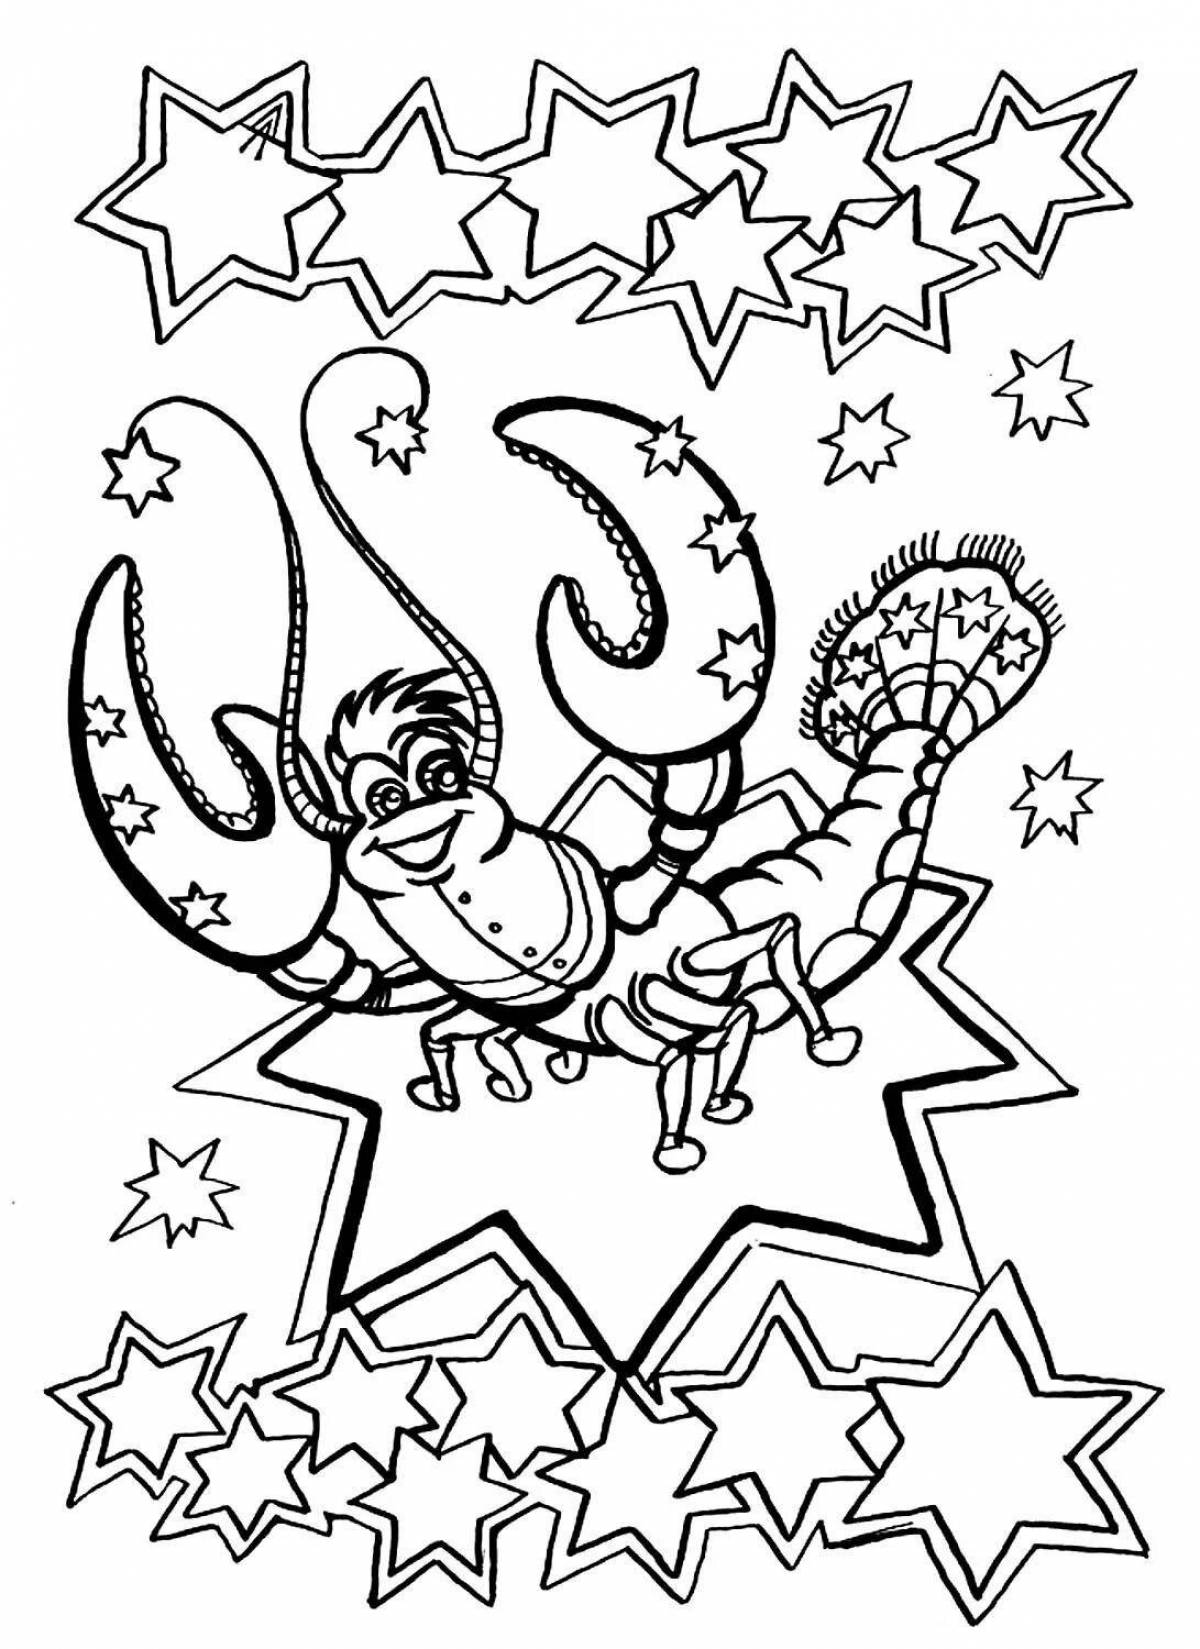 Colorful coloring pages with zodiac signs to develop skills in children